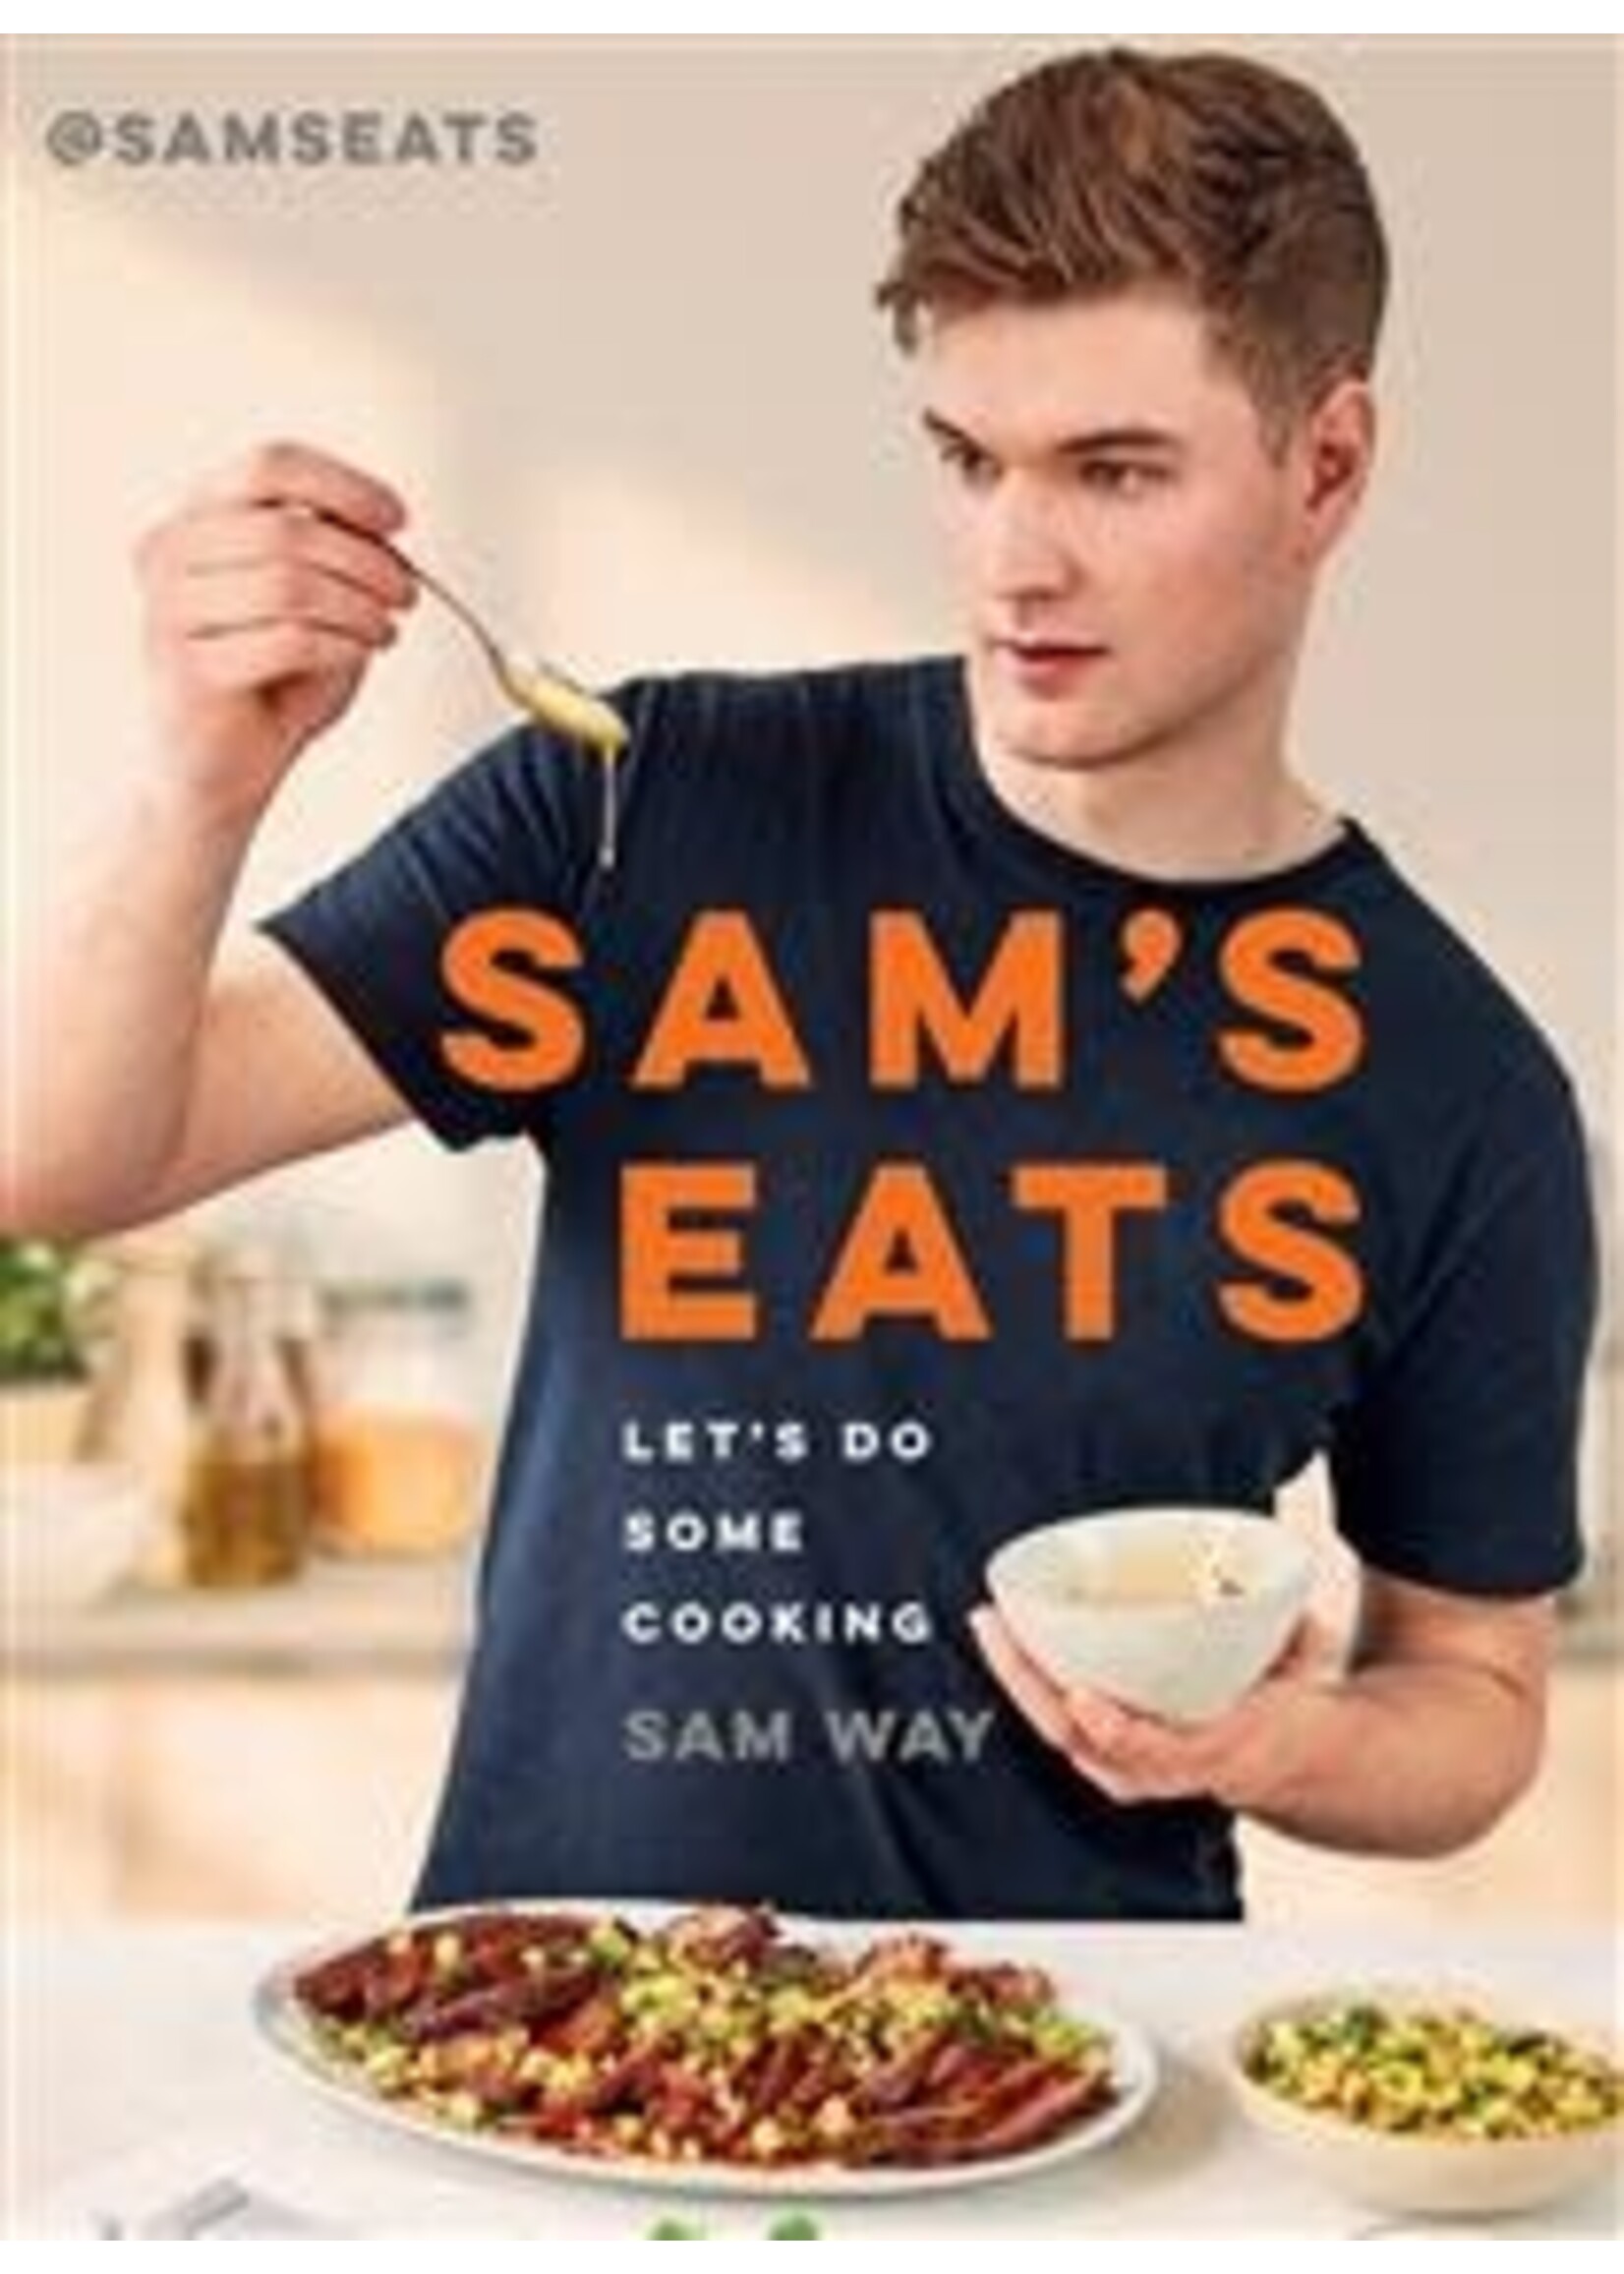 Sam's Eats: Let's Do Some Cooking by Sam Way